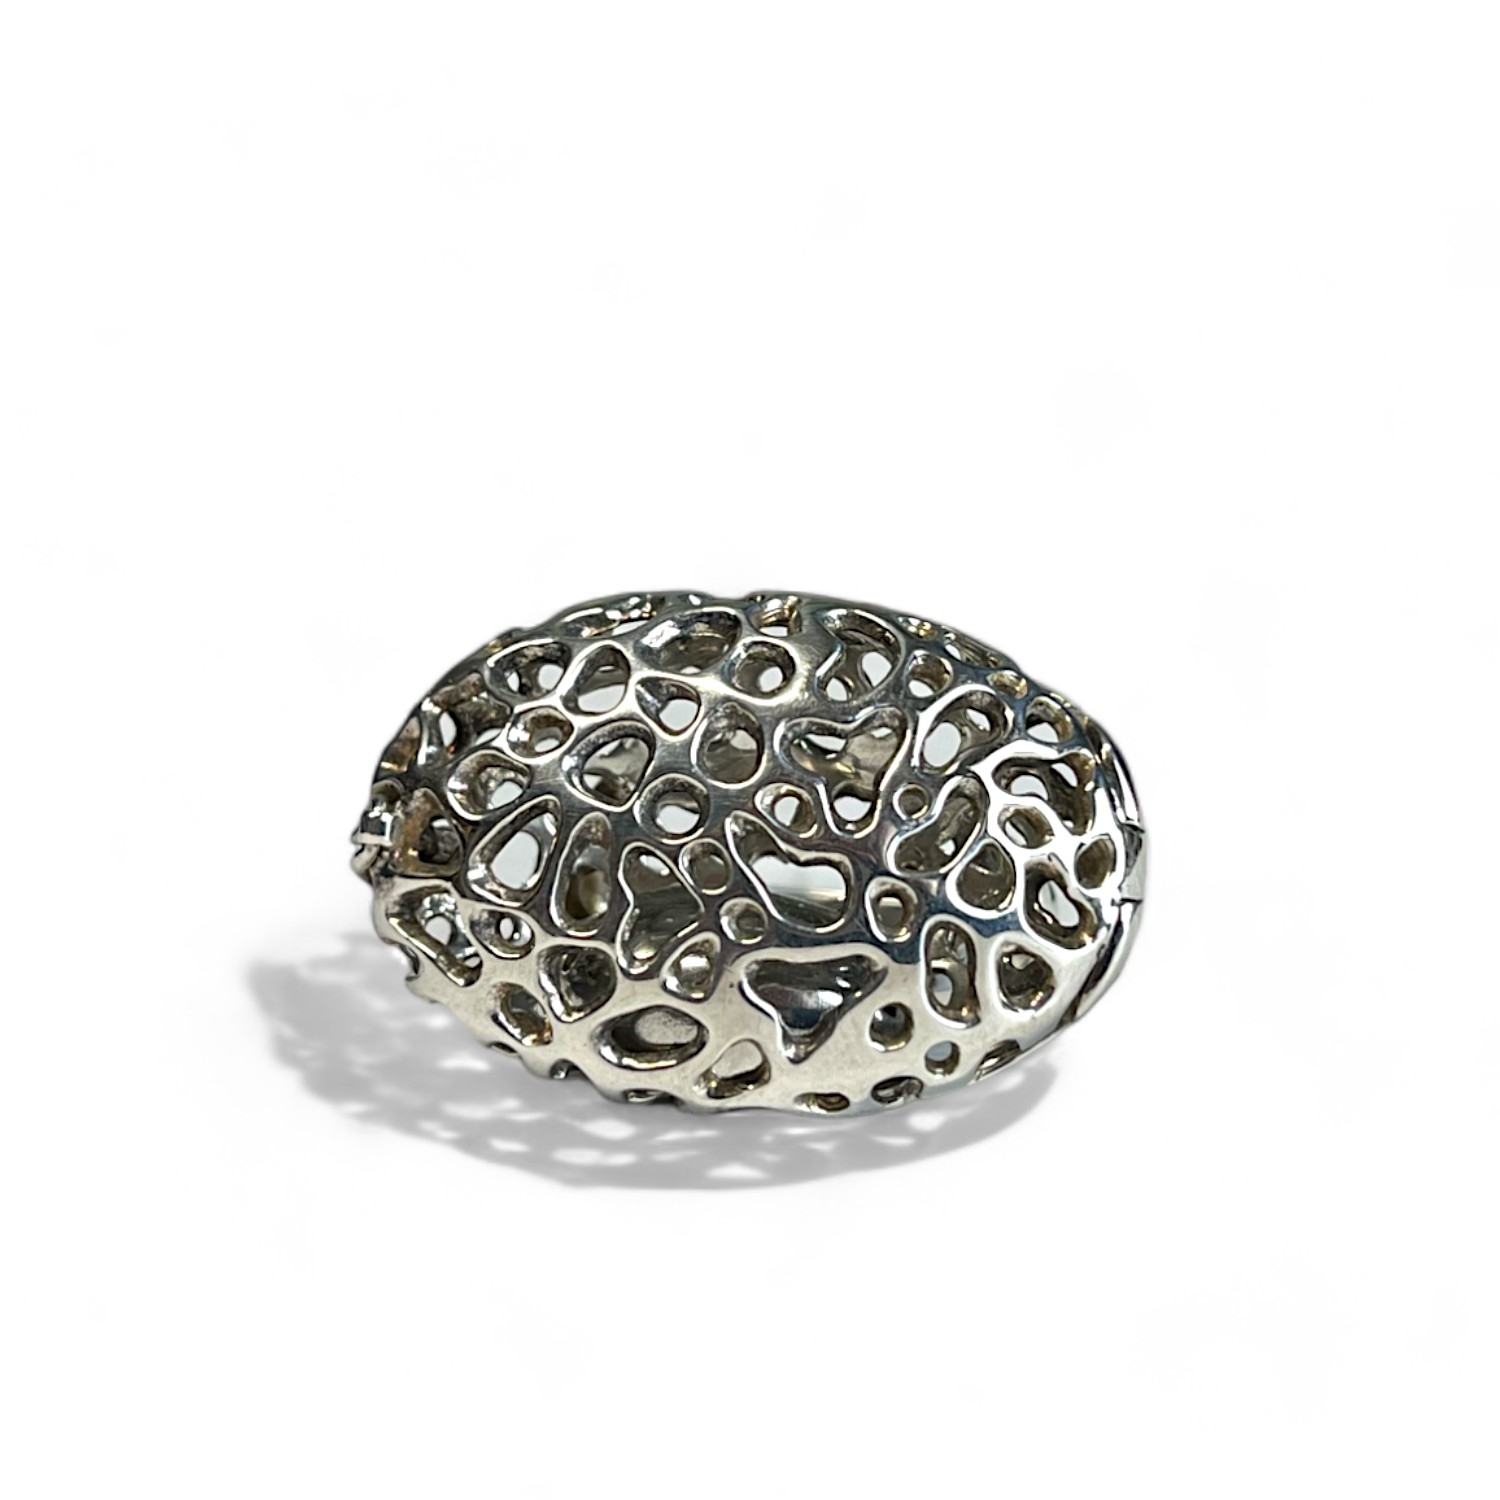 A large Rachel galley sterling silver pebble charmed ring. Large pierced setting, with hinged top co - Image 2 of 3